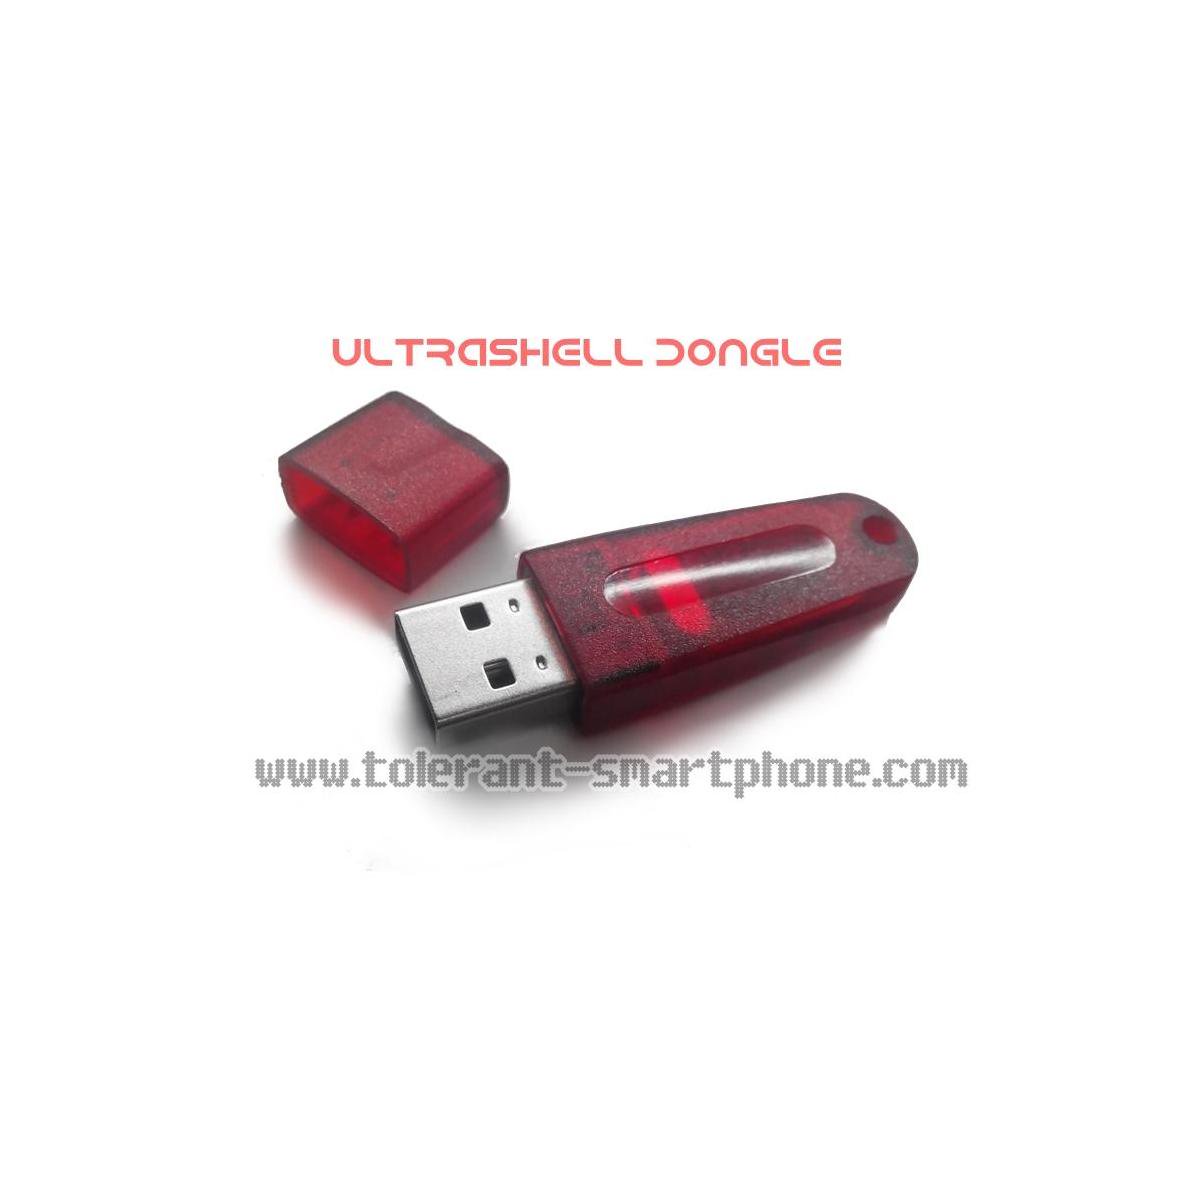 download dongle ultrashell